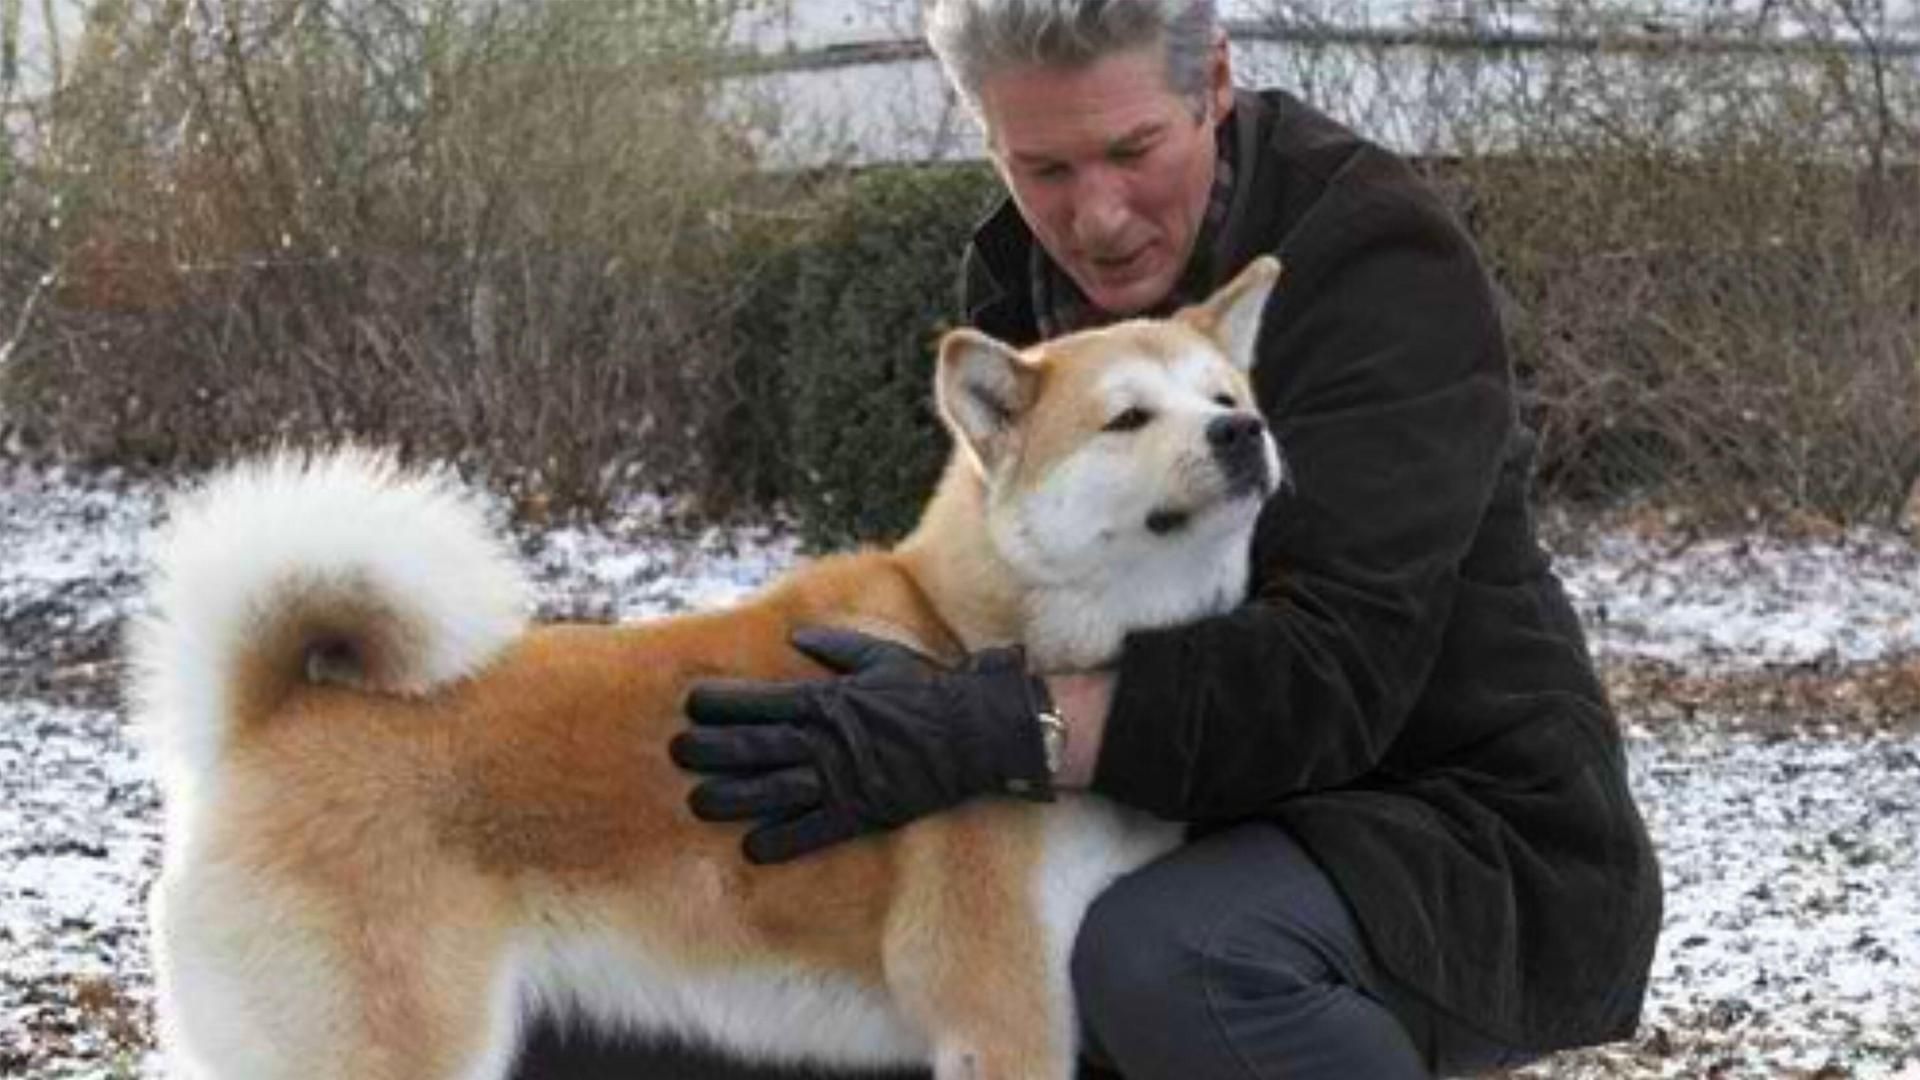 <p>                     A college professor (Richard Gere) bonds with an abandoned Akita dog and takes it into his home. Fairly slow-moving, but a touching treat for dog lovers with its observations on grief, loyalty and the relationship between pets and their humans. Based on a true story in Japan; a tear-jerker.                   </p>